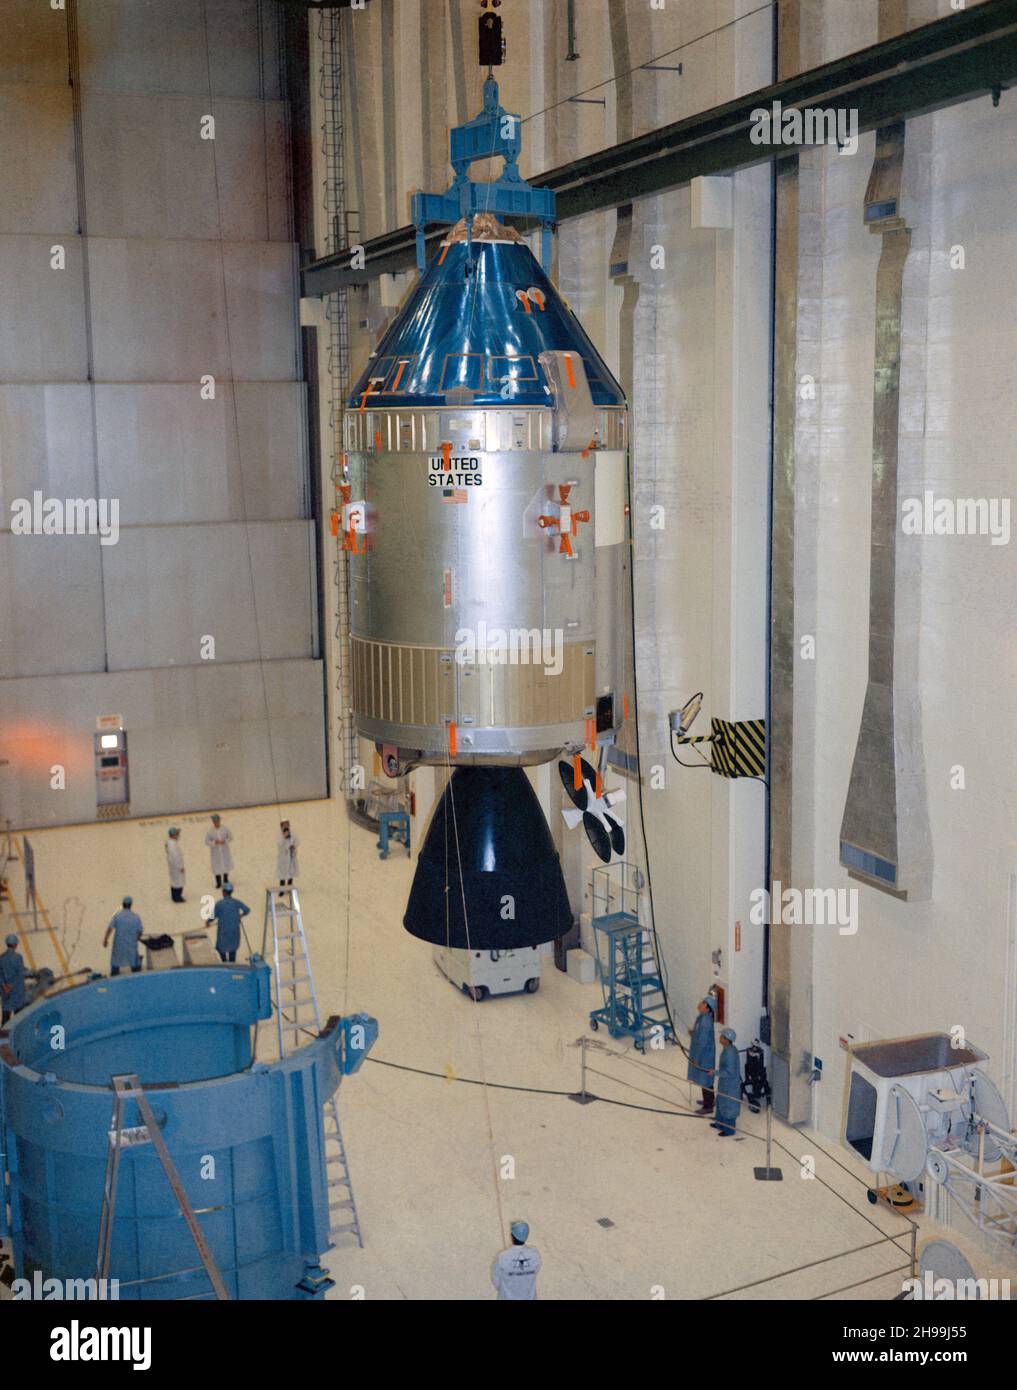 Interior view of the Kennedy Space Center's Manned Spacecraft Operations Building showing Apollo Spacecraft 106/Command/Service Module being moved to integrated work stand number one for mating to Spacecraft Lunar Module Adapter (SLA) 13. Spacecraft 106 will be flown on the Apollo 10 (Lunar Module 4/Saturn 505) space mission. Stock Photo